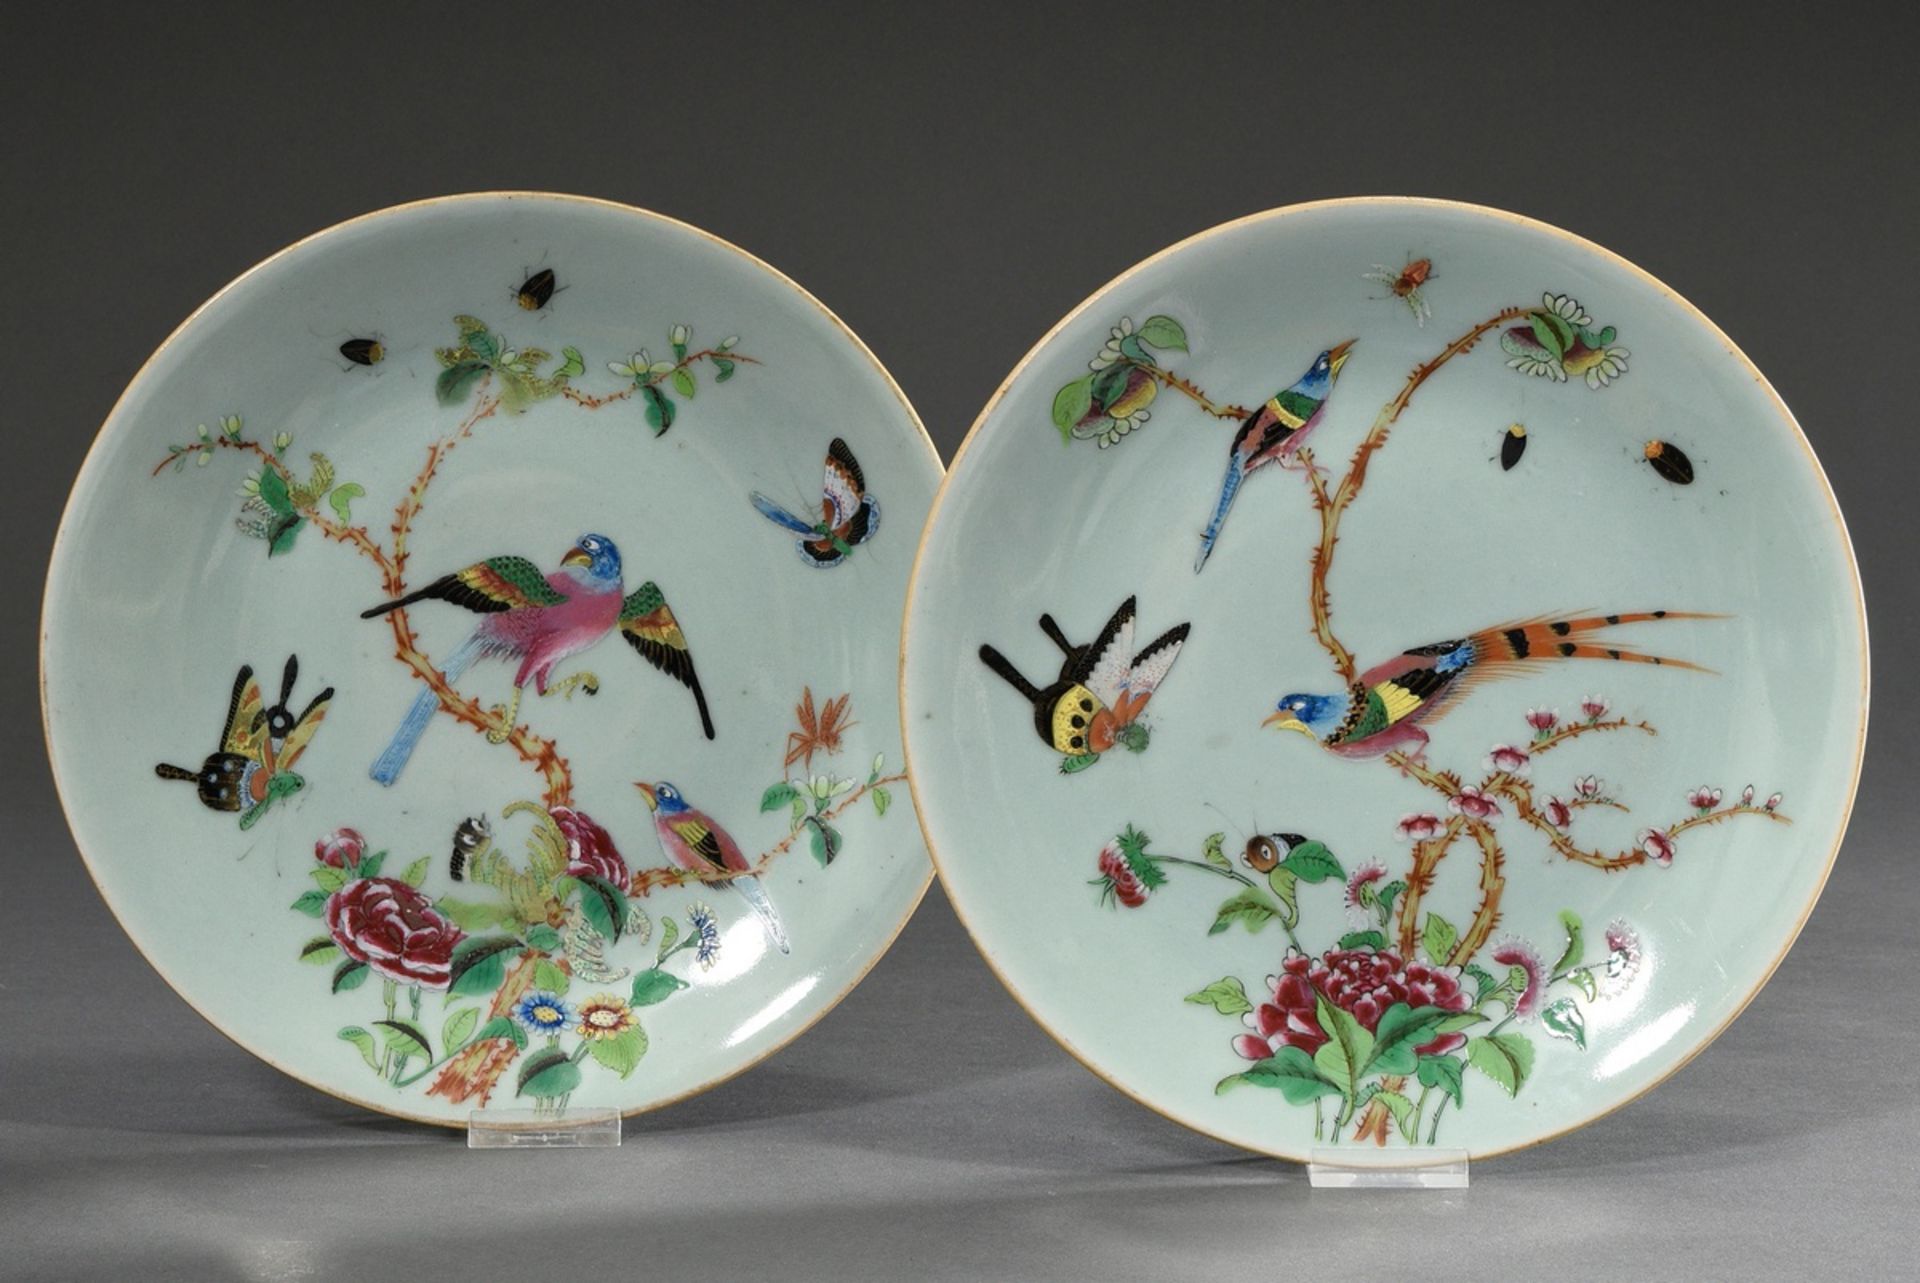 Pair of porcelain plates with polychrome enamel painting "Birds and Butterflies" on a delicate cela